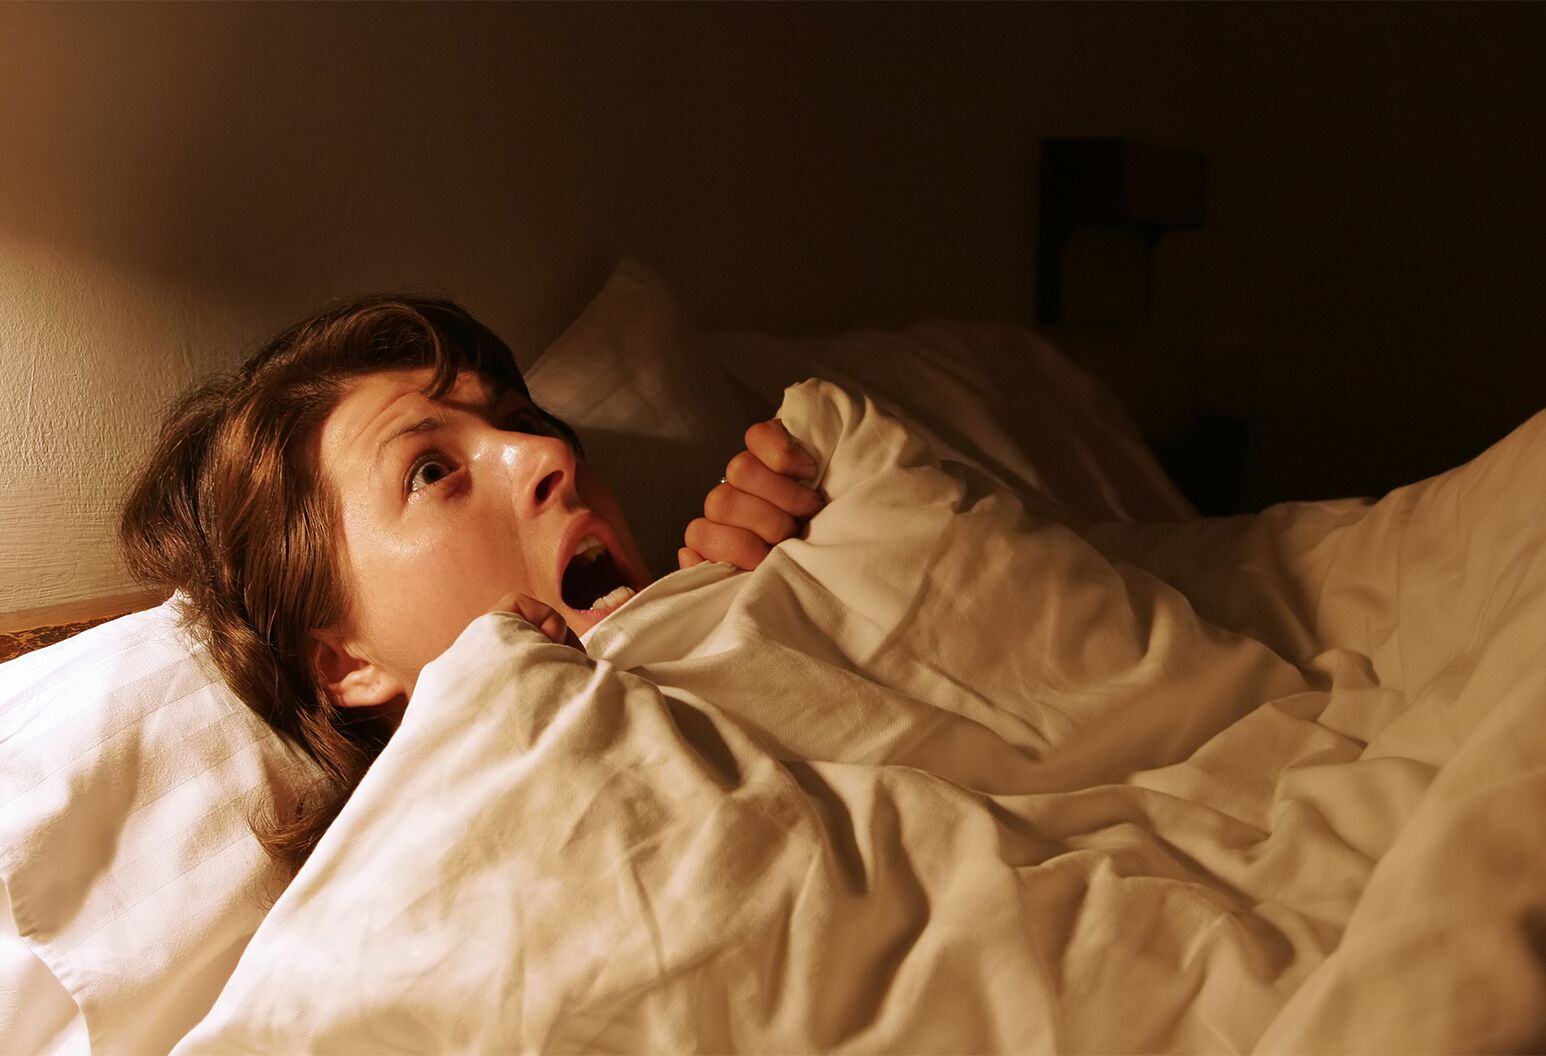 new research on night terrors